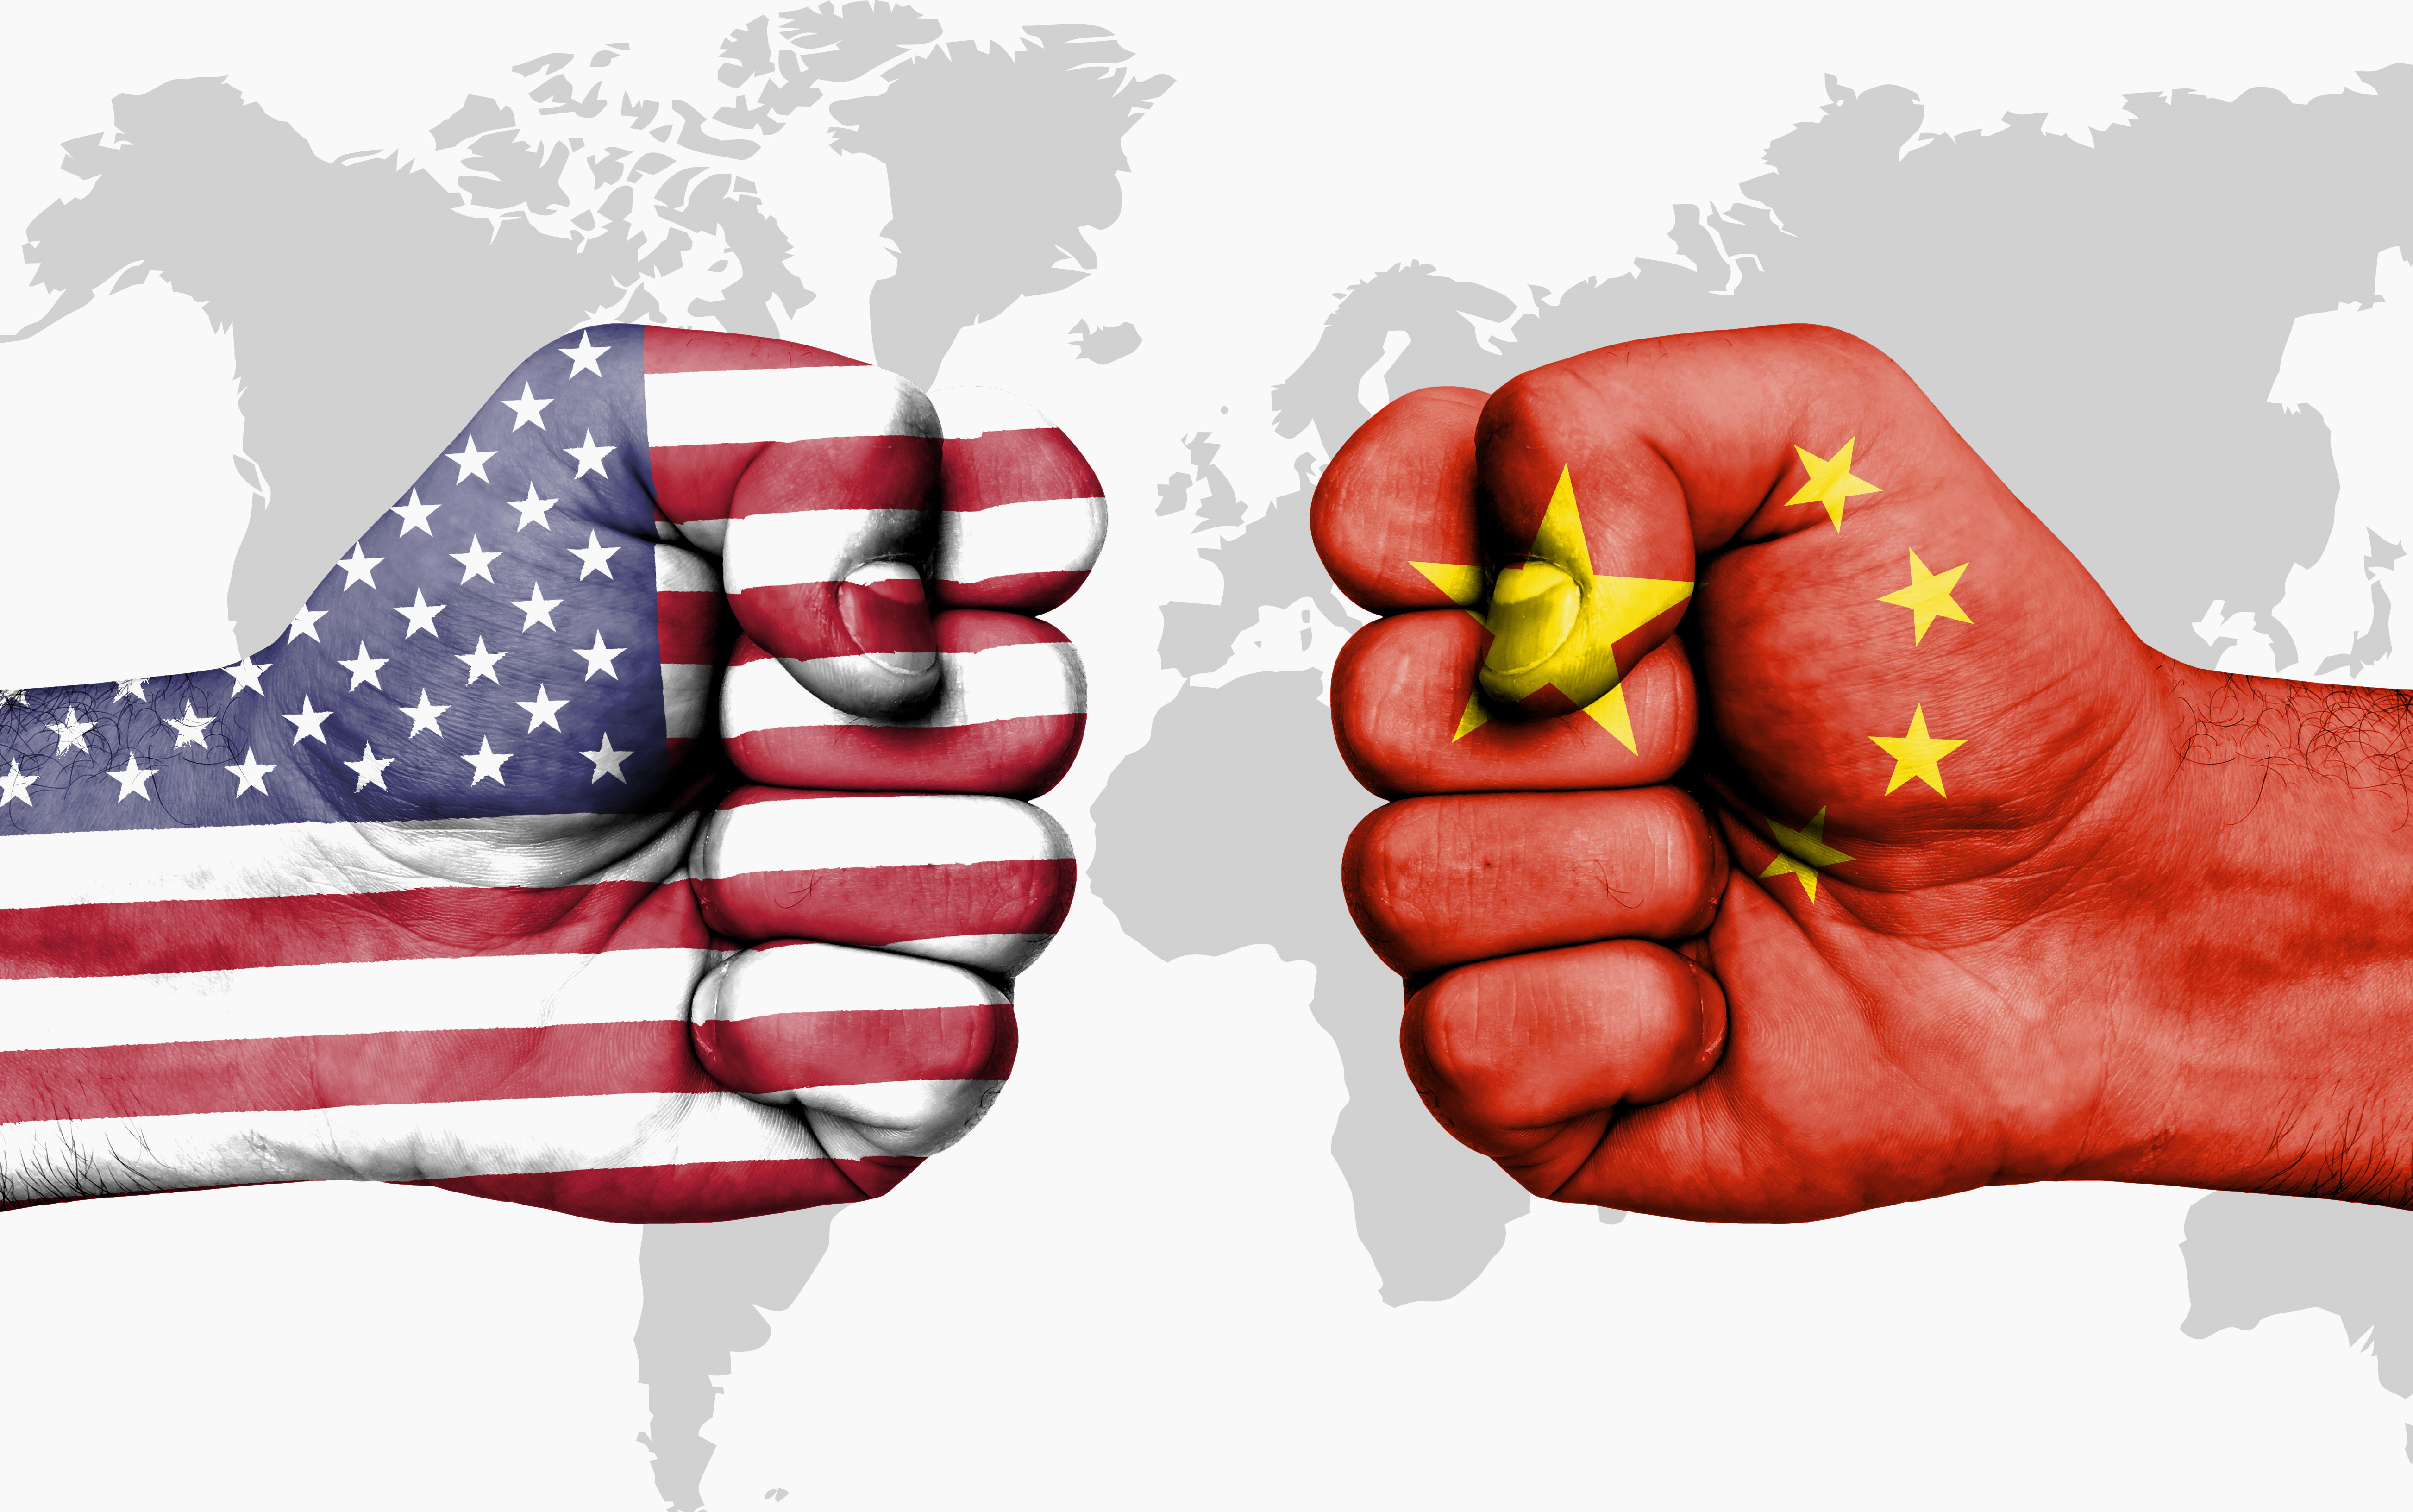 FxPro: Trade wars and protectionism helps cryptocurrency in the long run